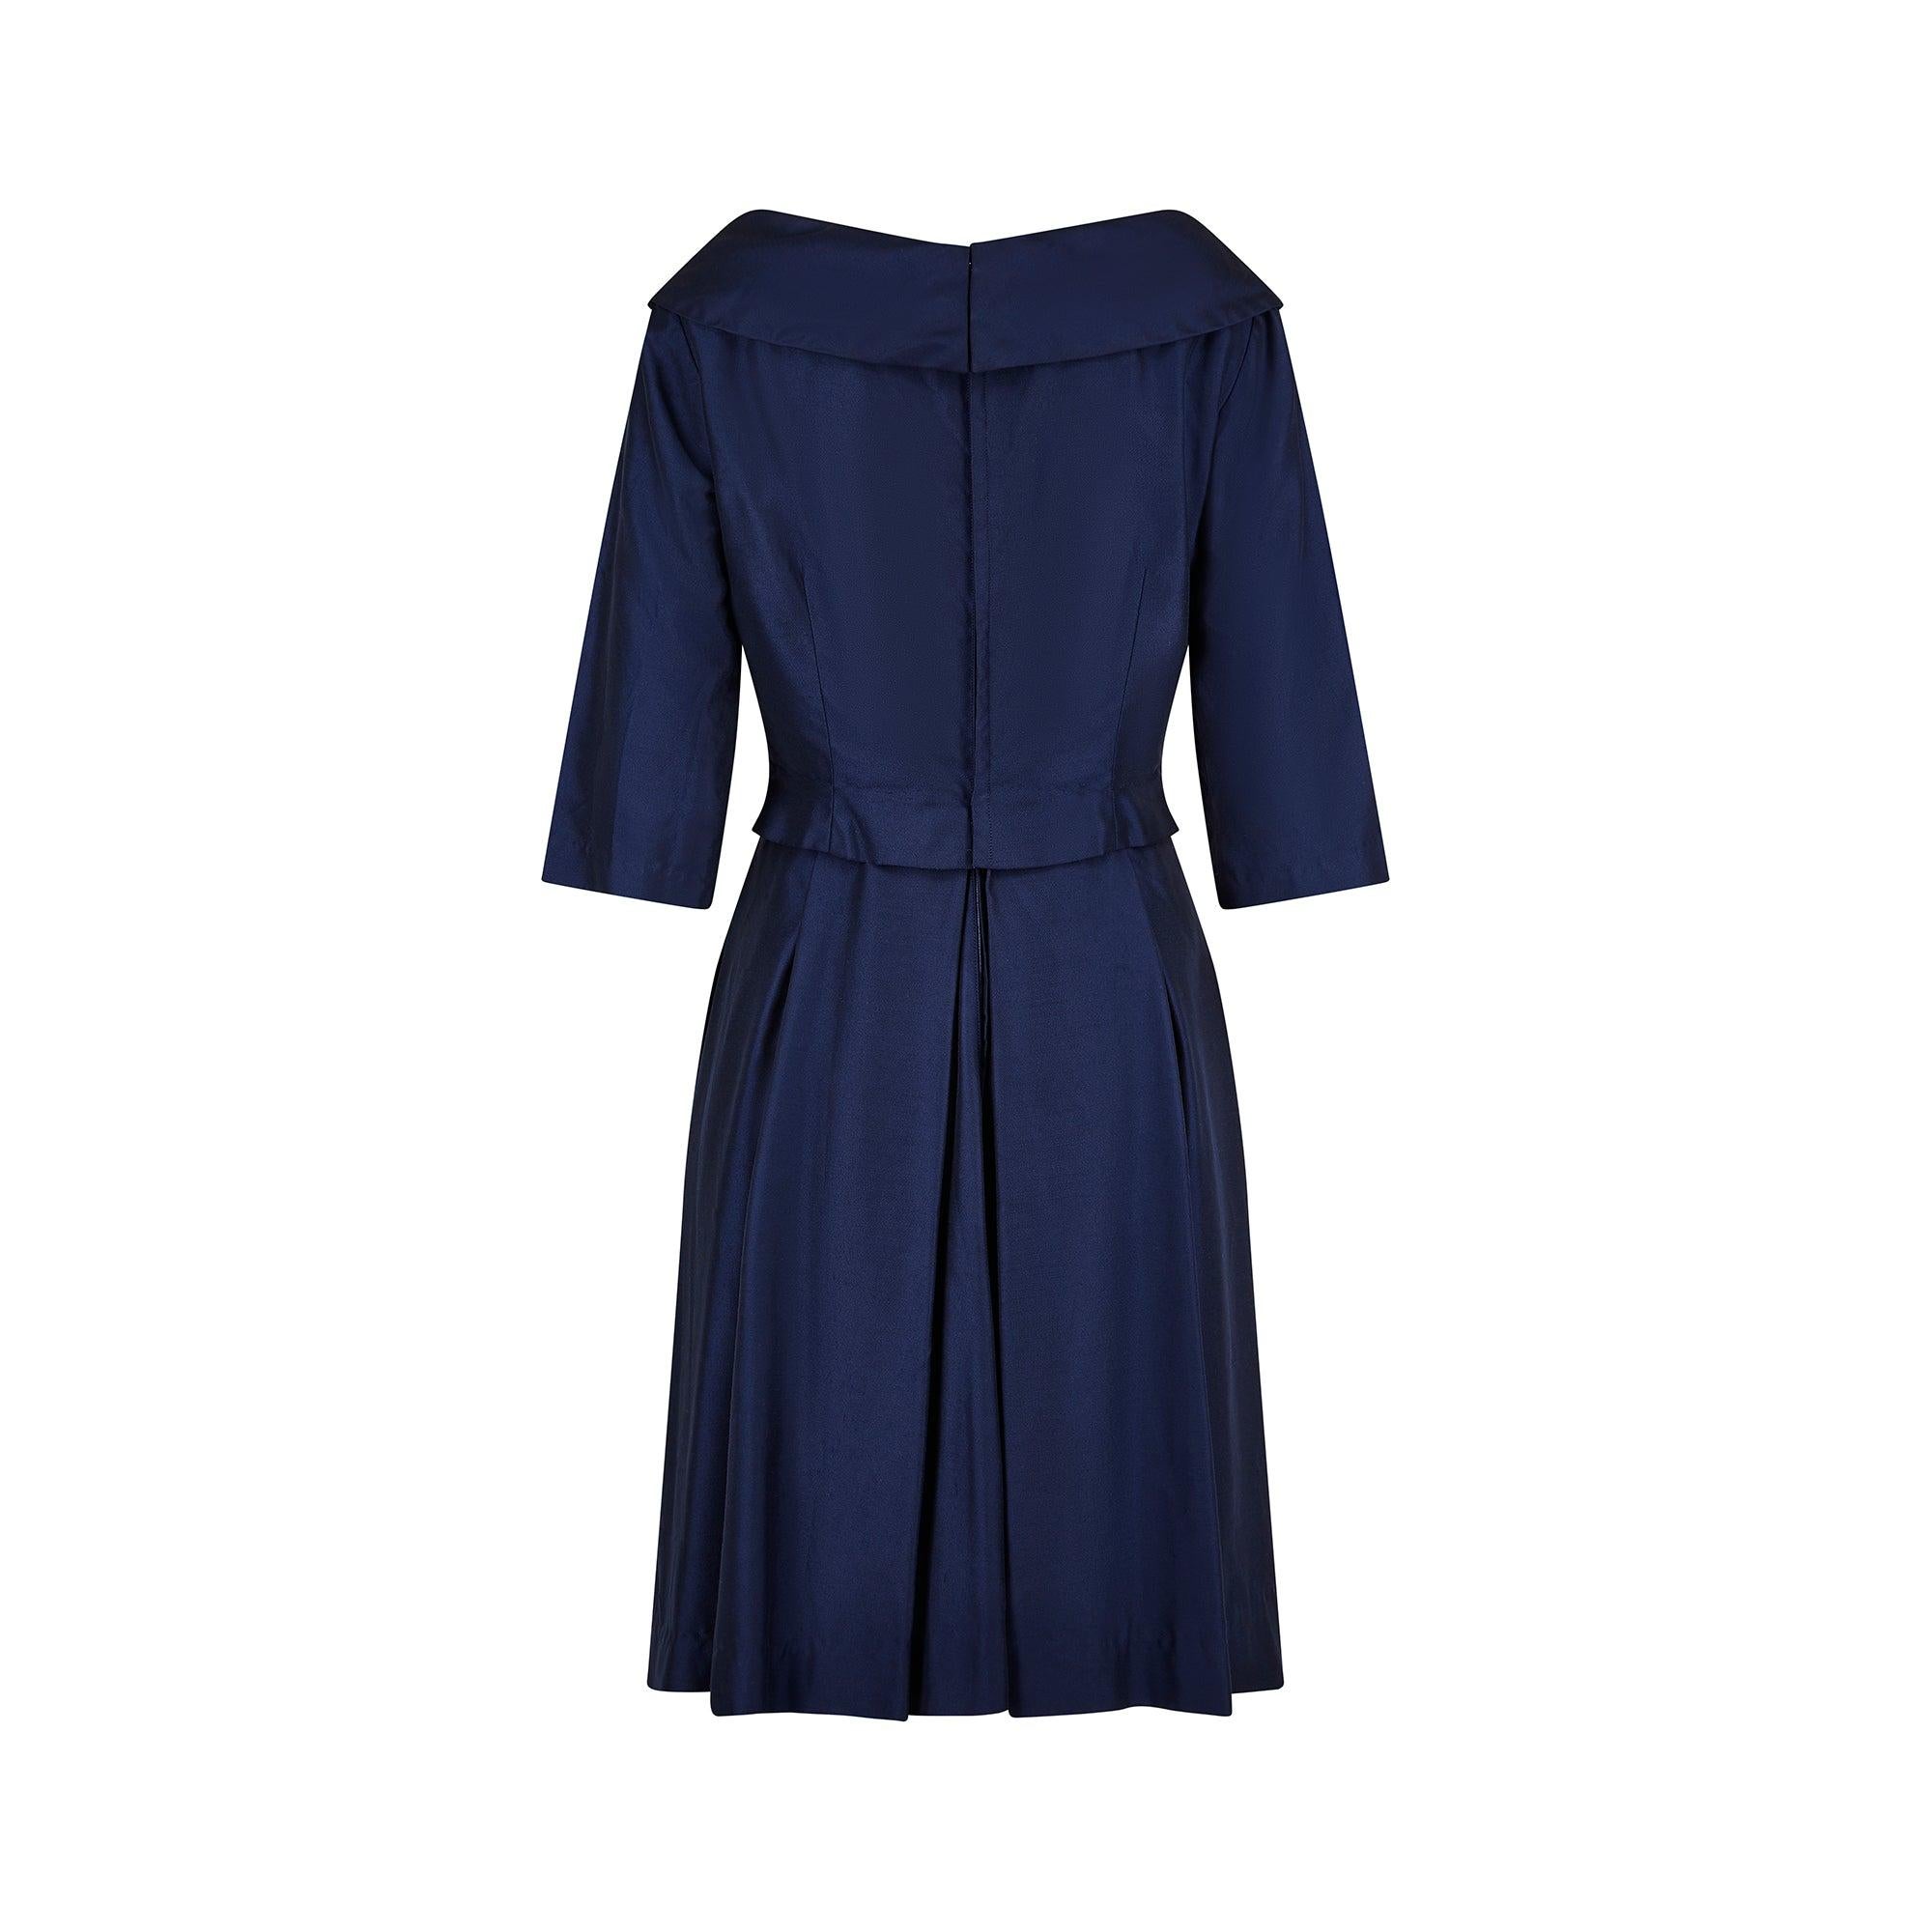 1950s Harrods Navy Double Breasted Dress In Excellent Condition For Sale In London, GB